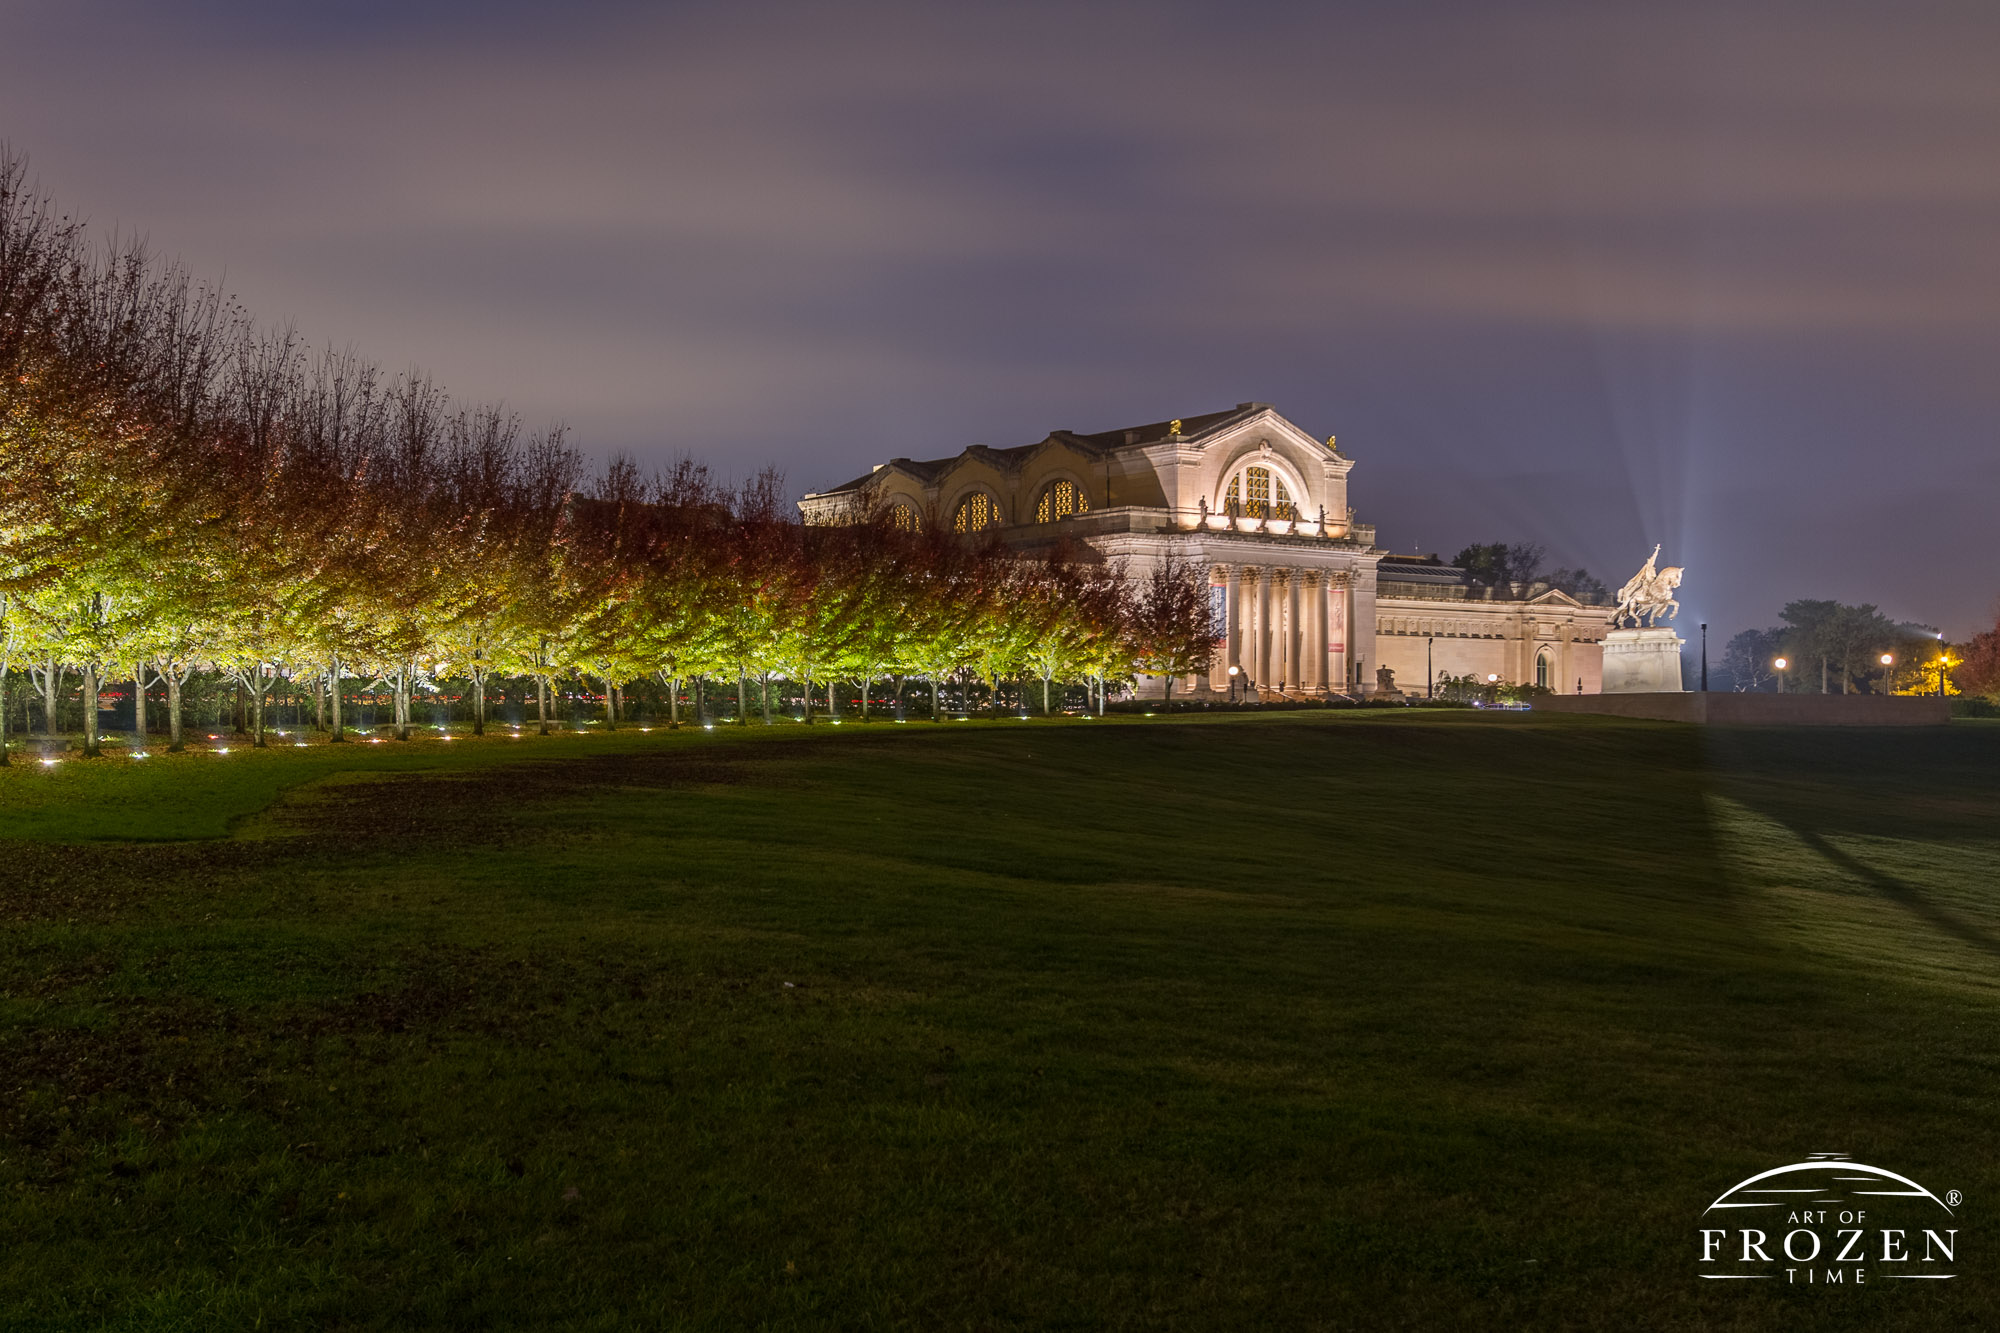 A nightscape image of the walkway to the St Louis Art Museum where the curve walkway lights up light the maple trees as well as the St Louis icon sculpture, the Apotheosis of St. Louis